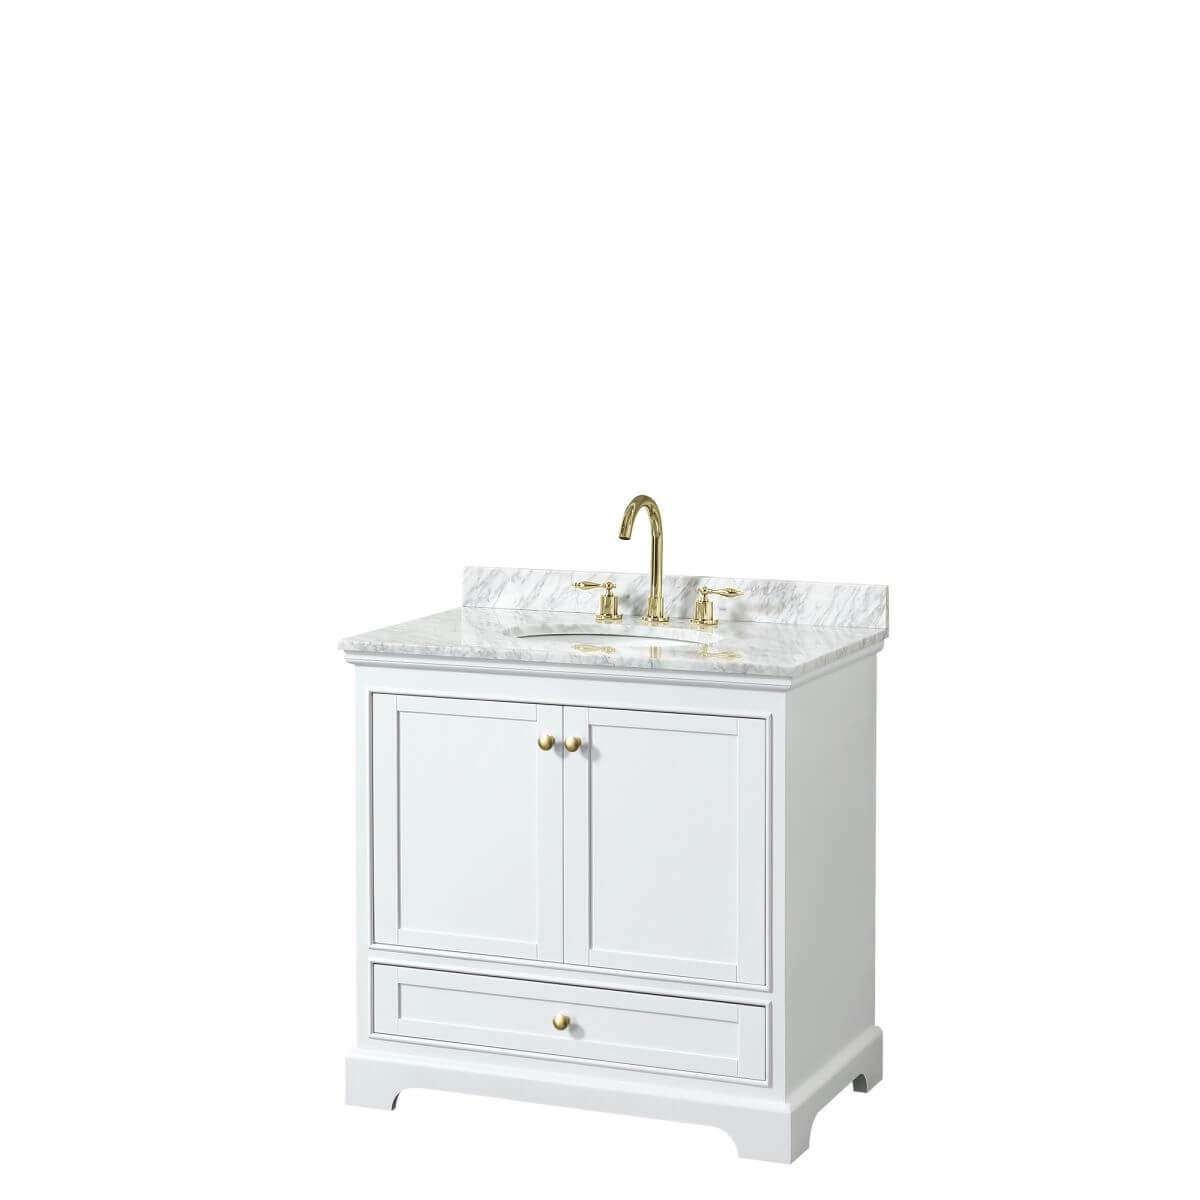 Wyndham Collection Deborah 36 inch Single Bathroom Vanity in White with White Carrara Marble Countertop, Undermount Oval Sink, Brushed Gold Trim and No Mirror - WCS202036SWGCMUNOMXX